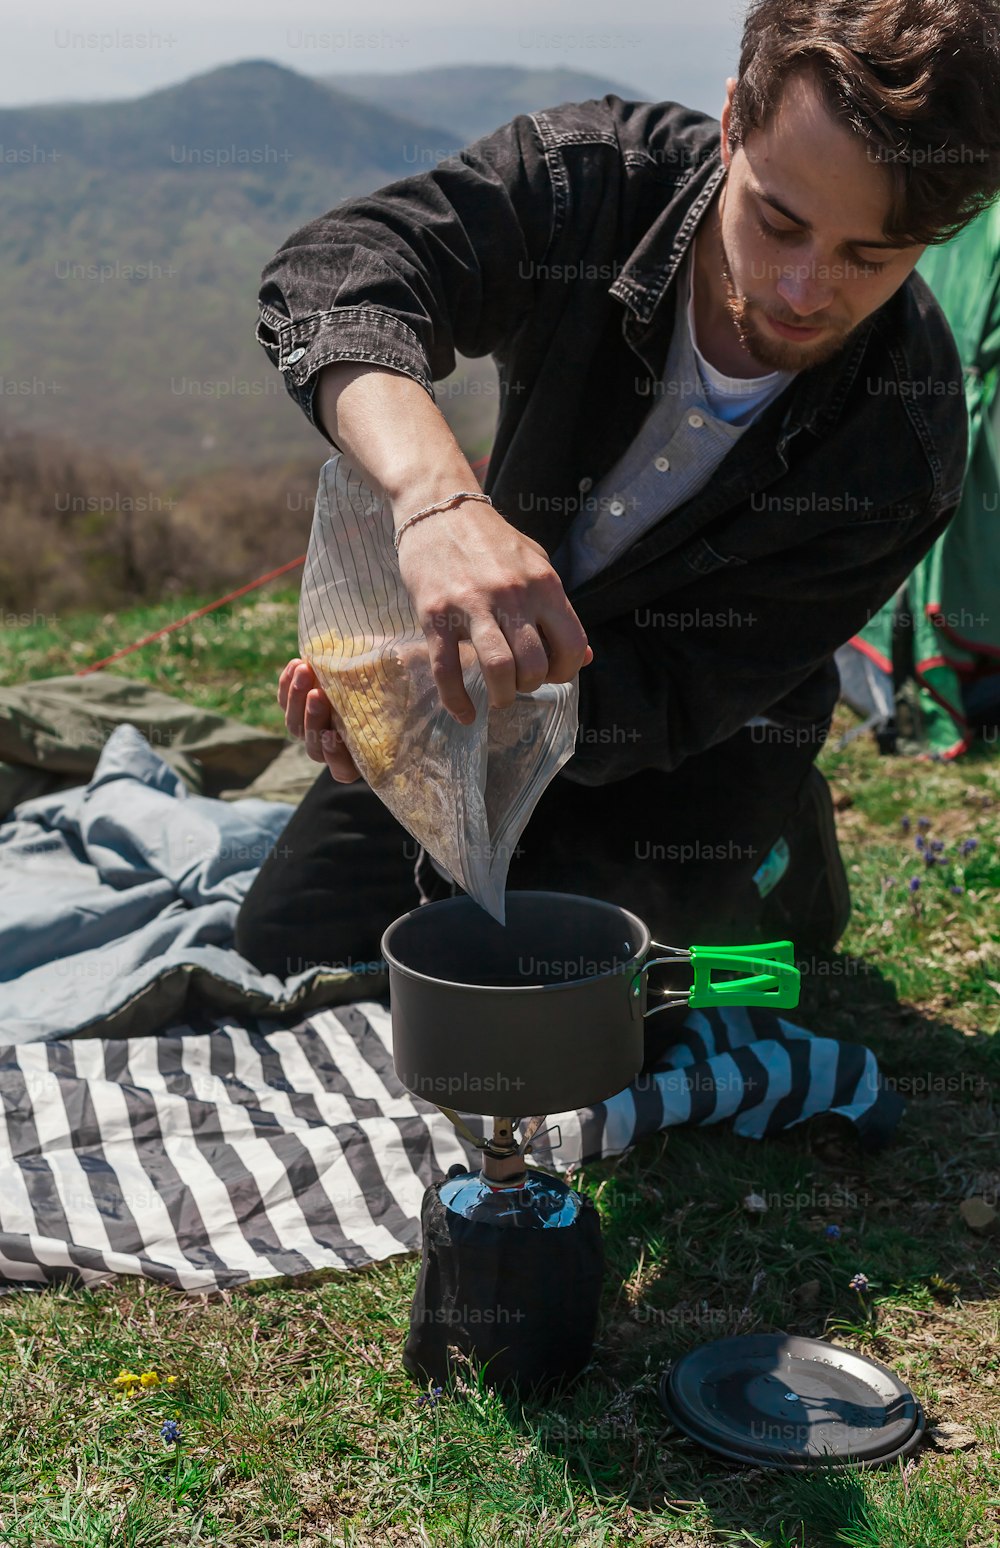 a man is pouring something into a pot